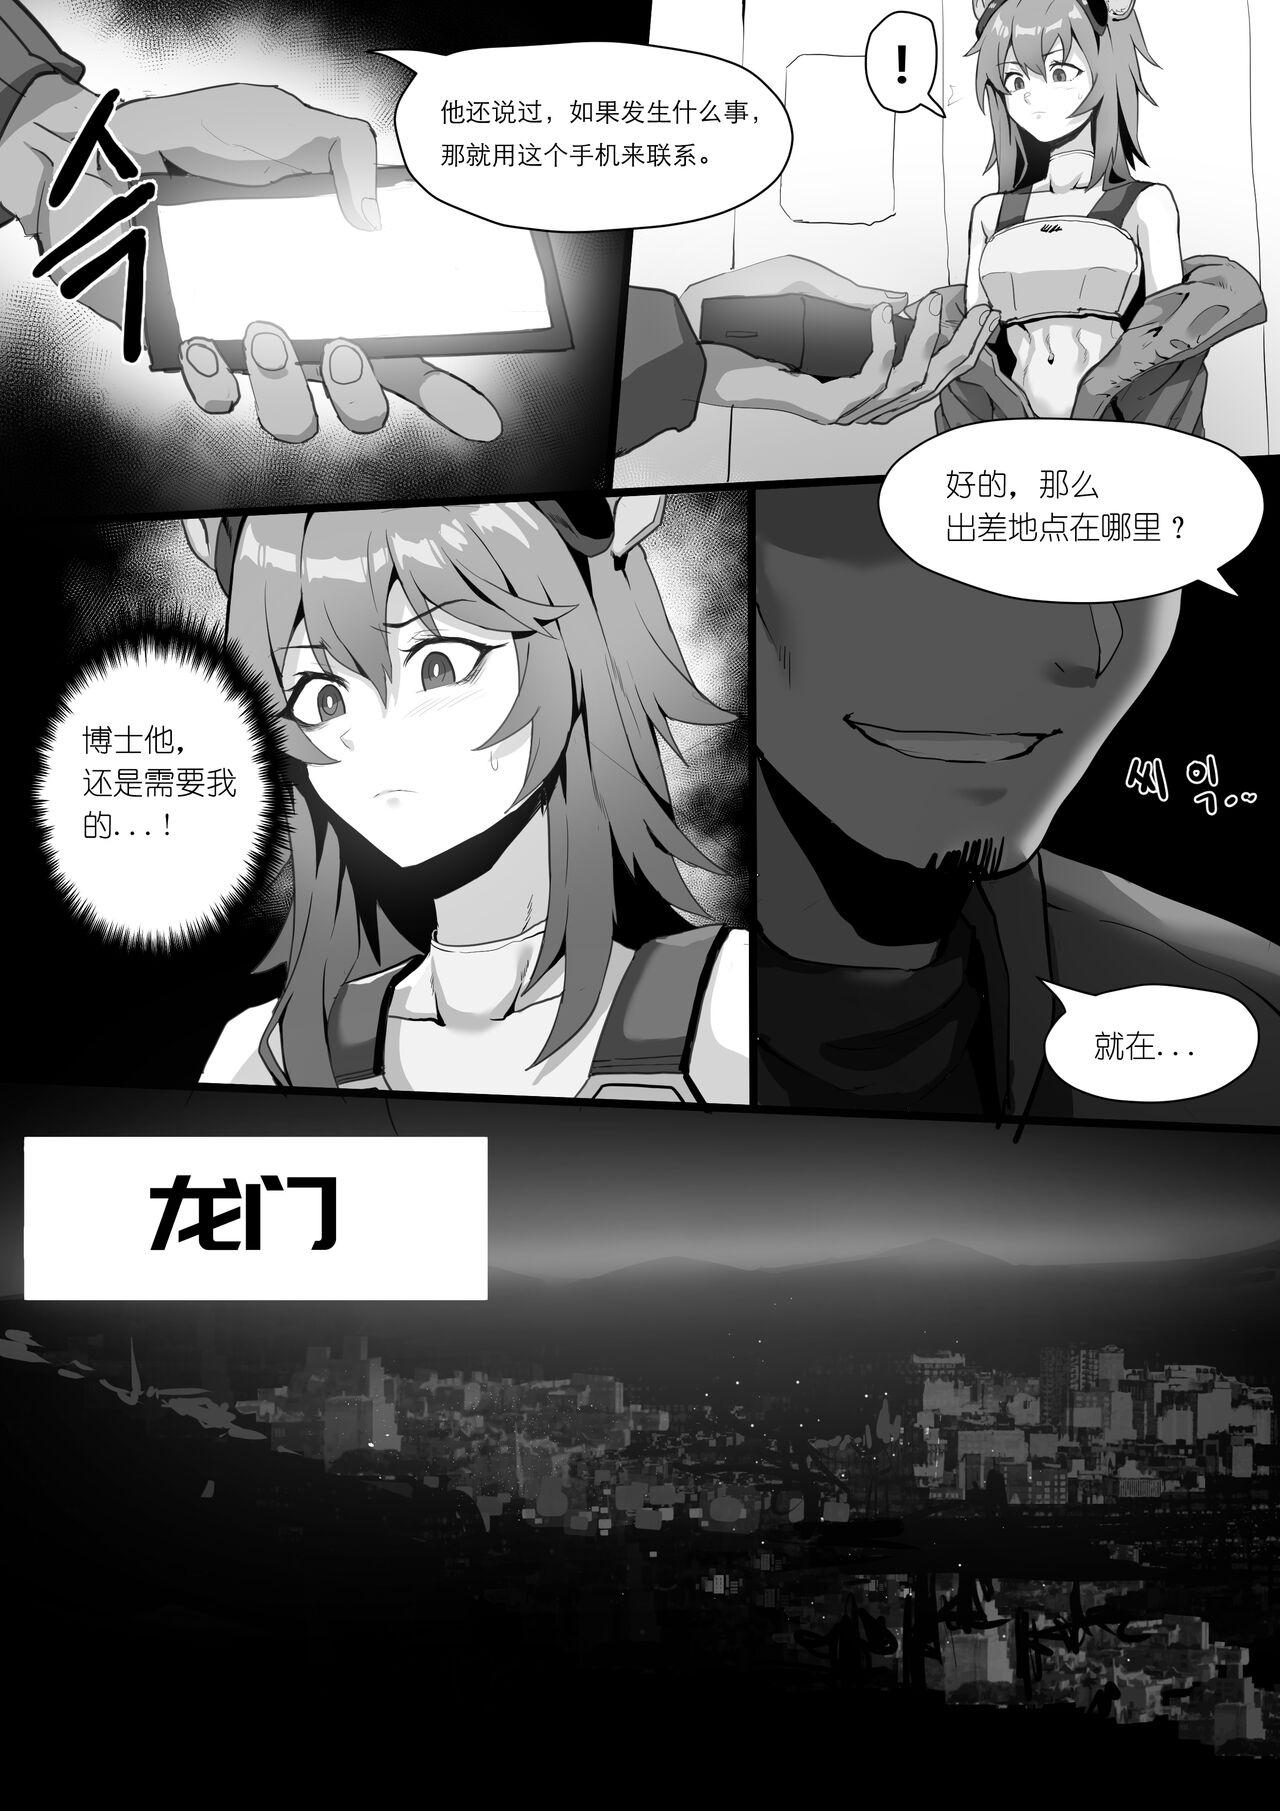 Dicks 欲望方舟记录3 - Arknights Tanned - Page 7